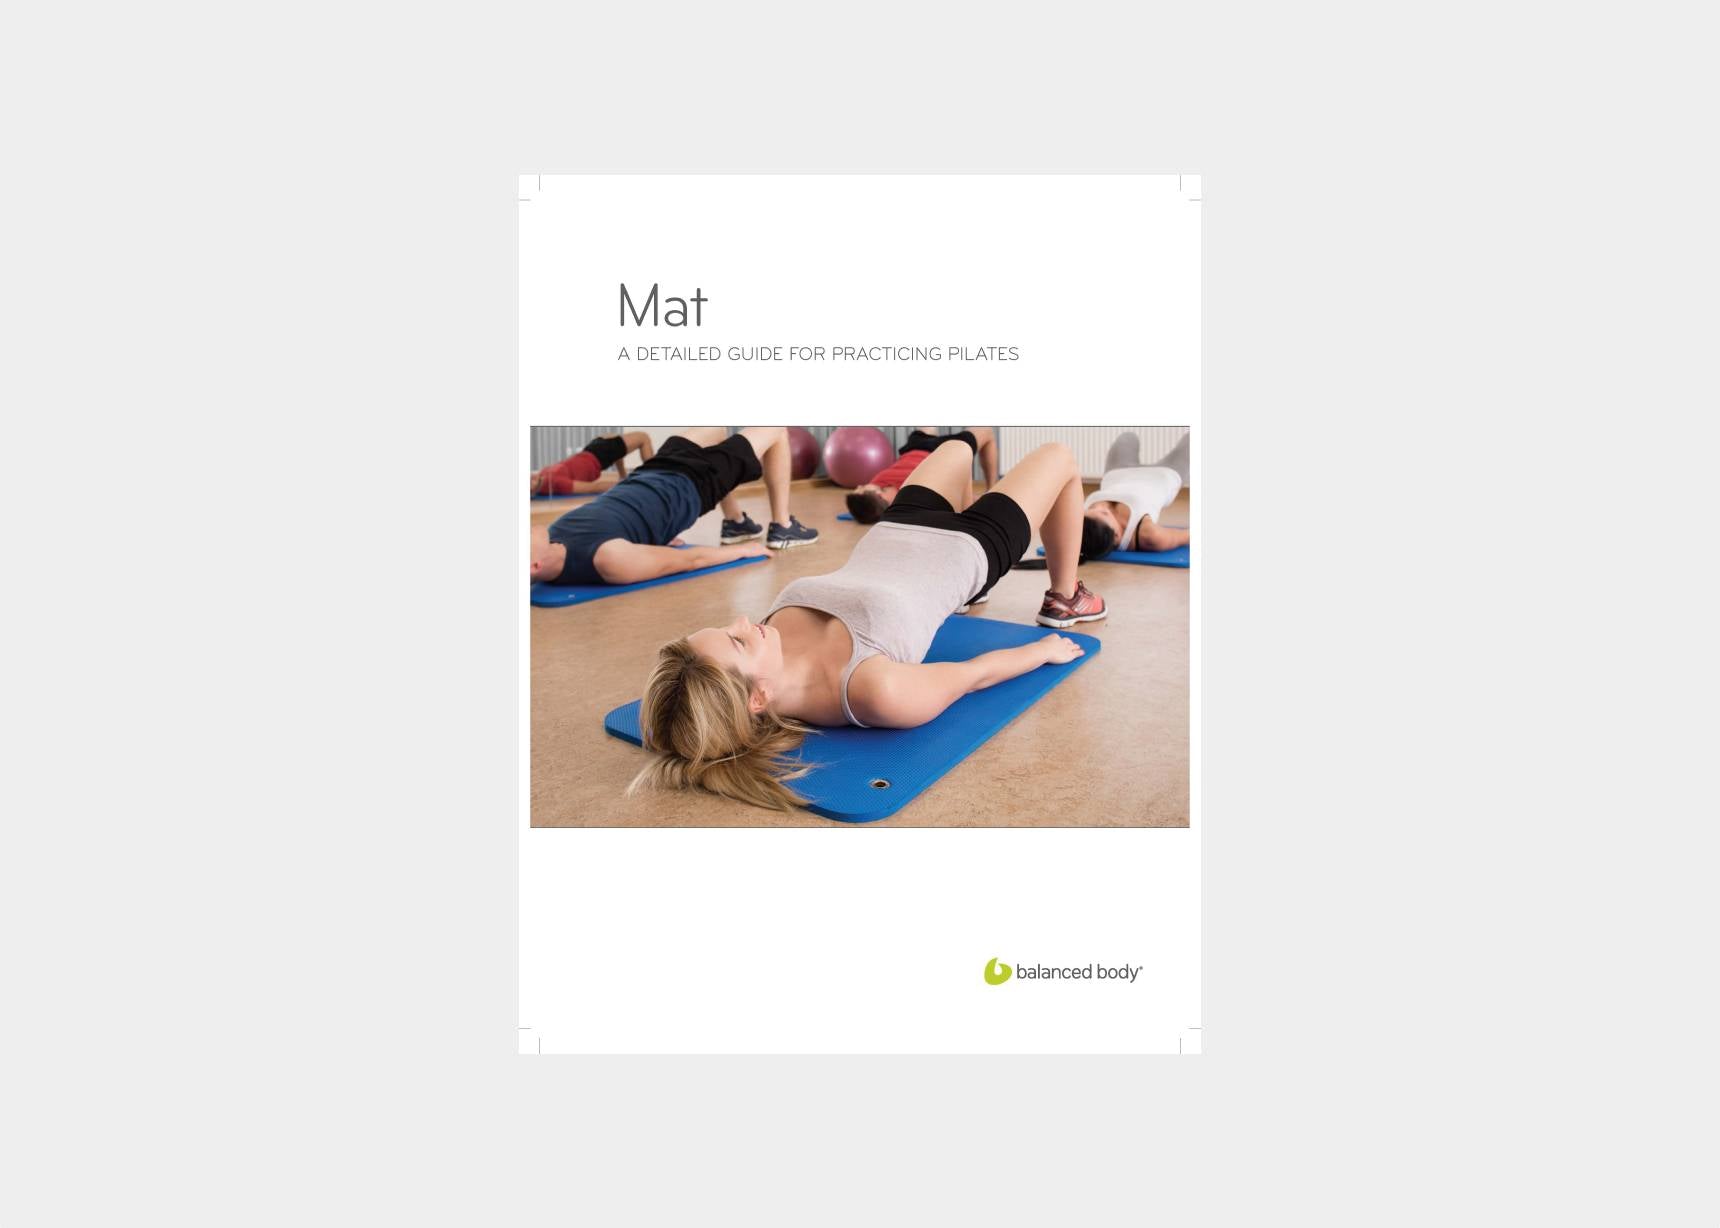 Balanced Body Manual for Pilates Reformer, Pilates Manual and Workout Book,  Exercise and Health Book for All Fitness Levels